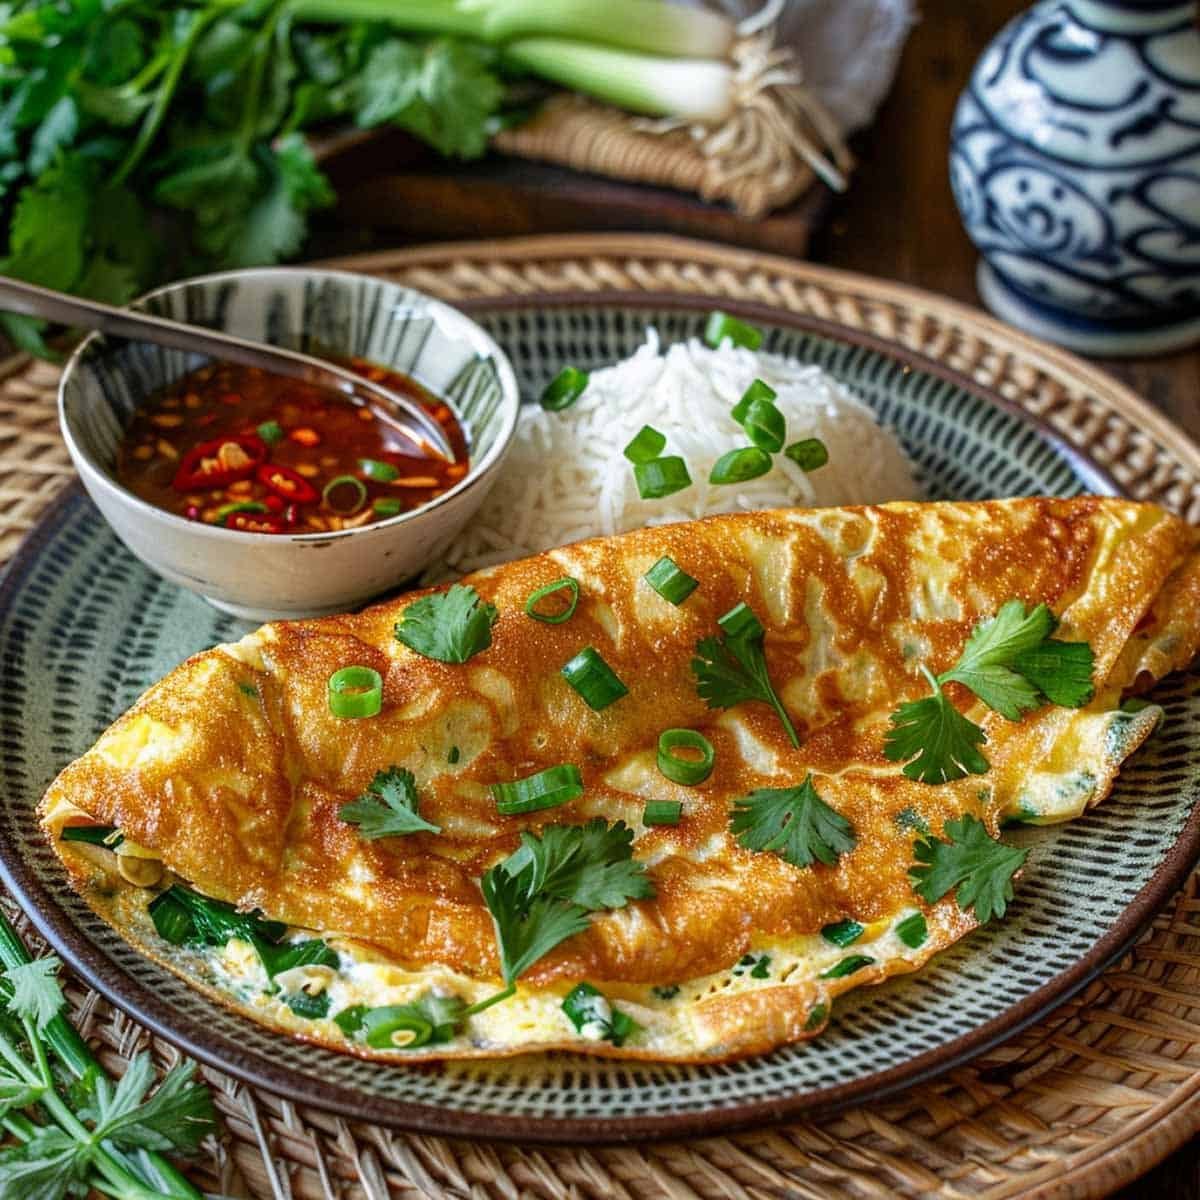 Plate with Thai Omelet (Kai Jiao) topped with spring onions, served with jasmine rice